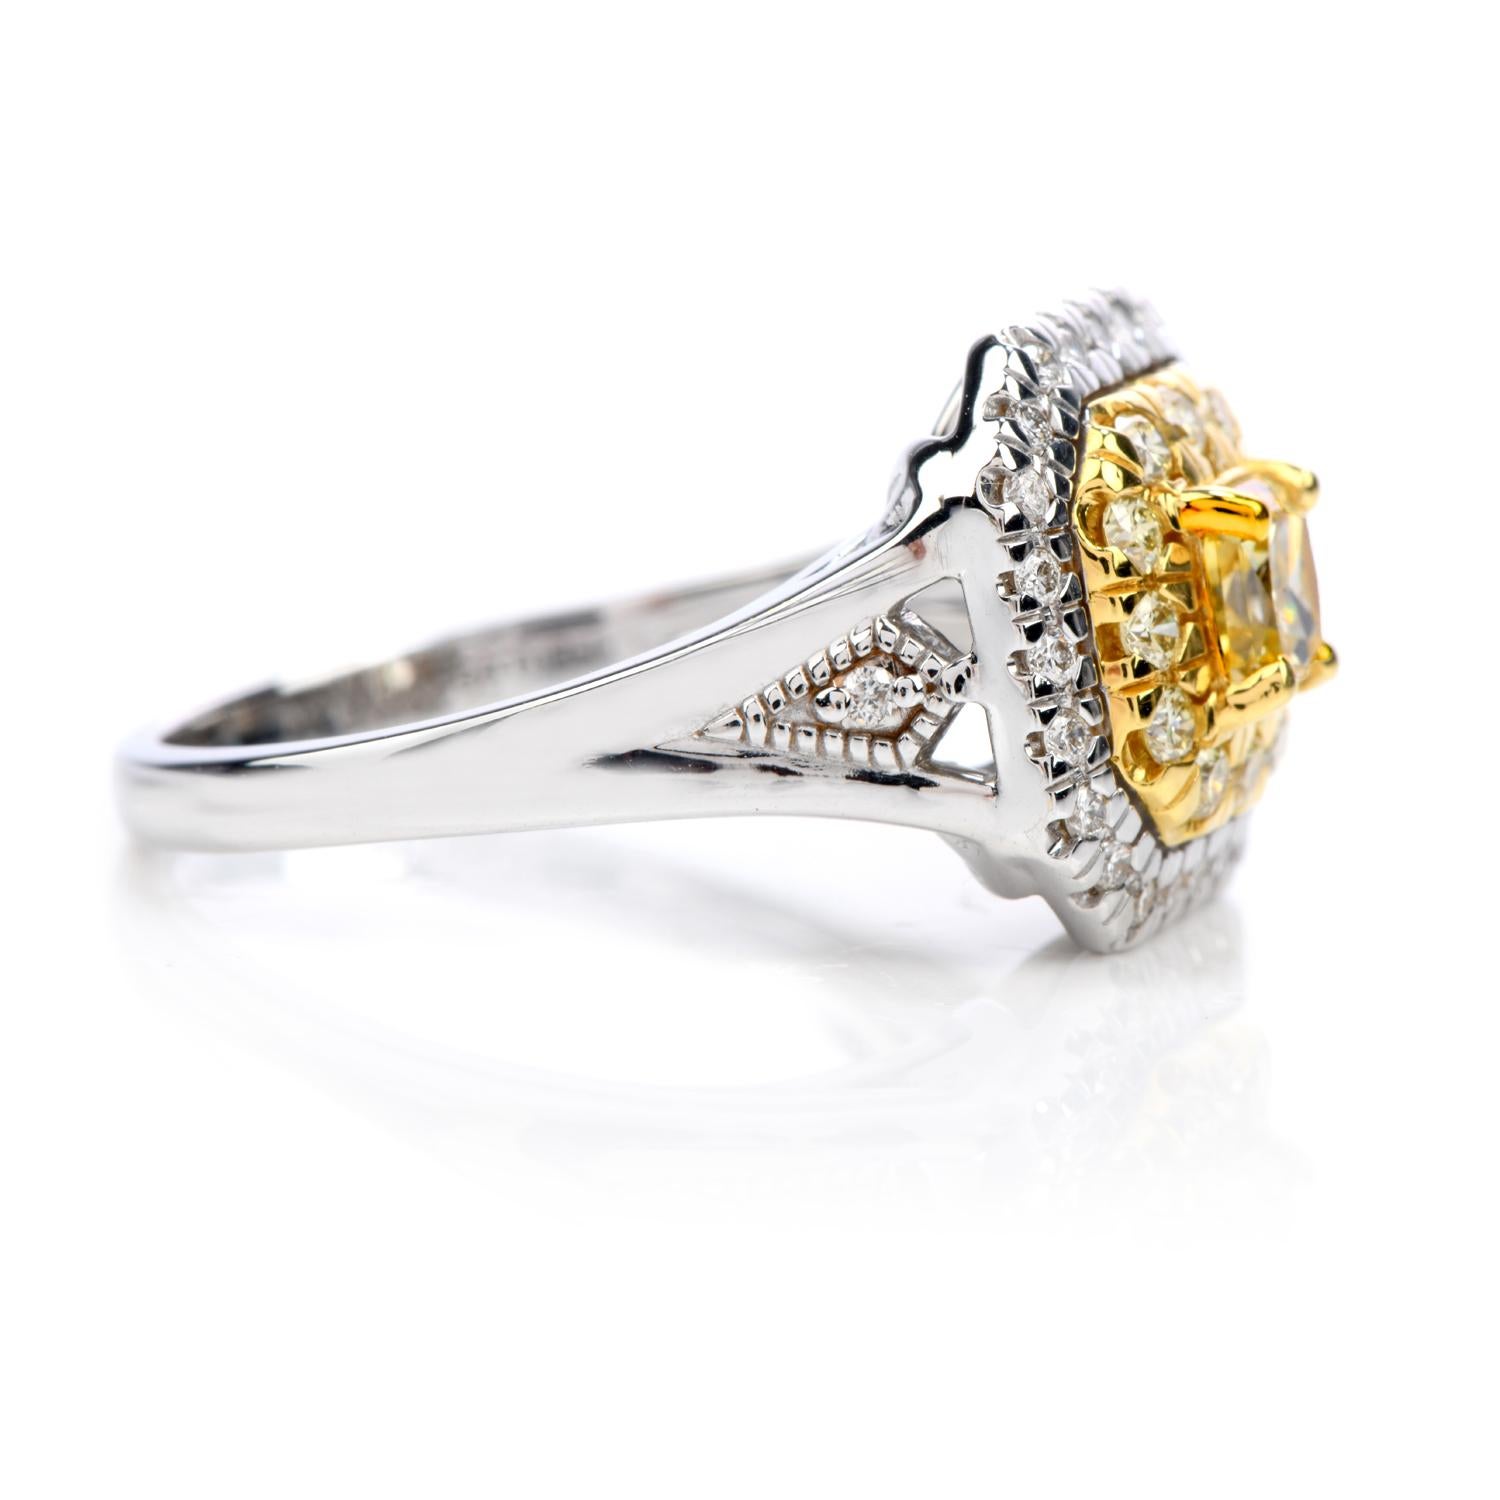 Vibrant double halo design, this GIA-certified natural yellow Diamond engagement ring is exquisite!

Crafted in solid 18K white gold with yellow gold accents, the center is adorned by a GIA-certified princess-cut natural fancy yellow diamond, with a